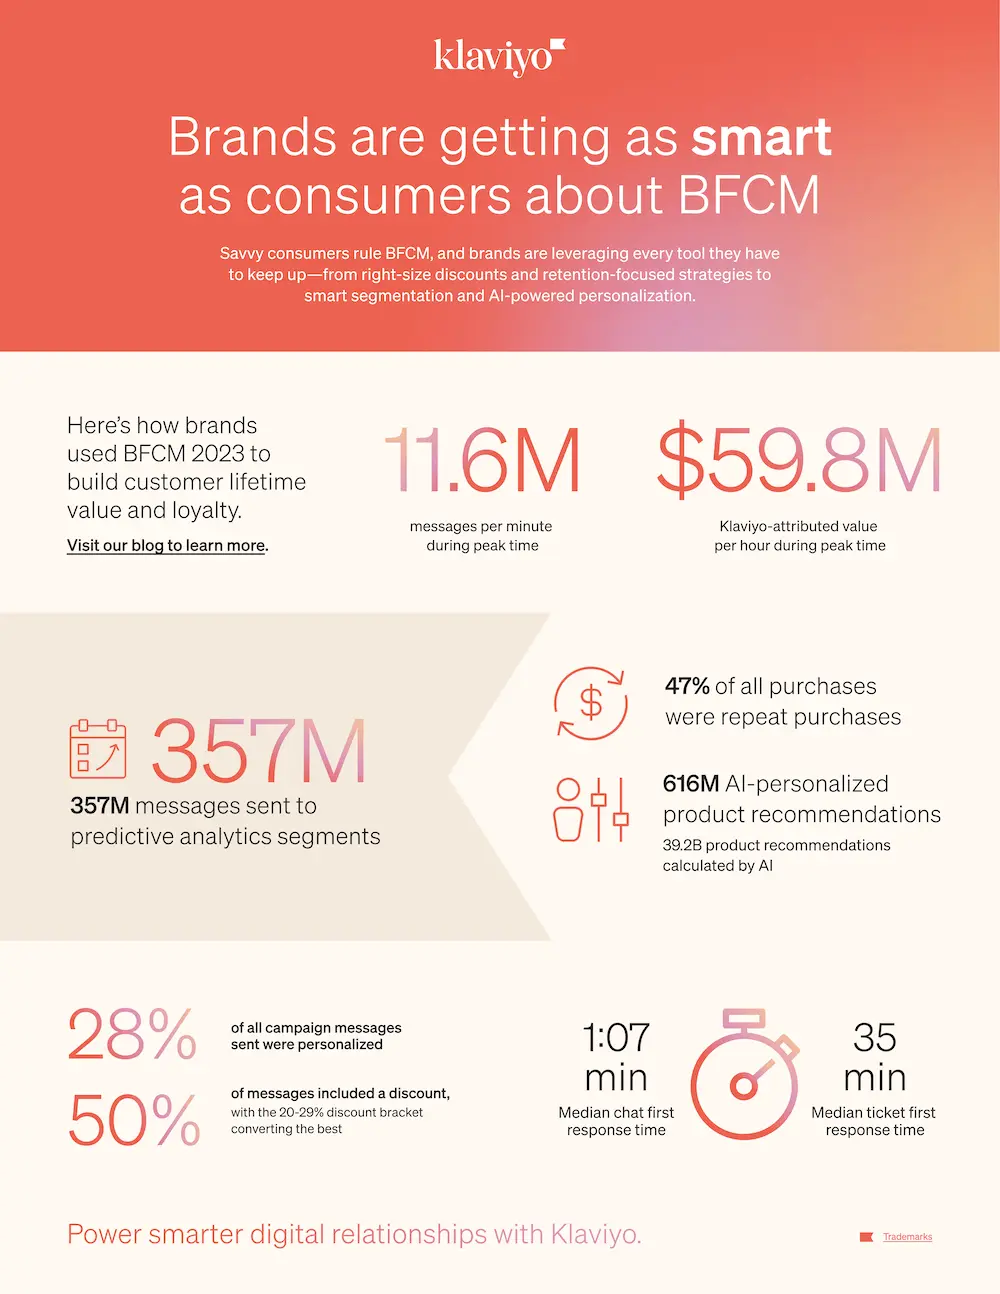 Infographic rounds up stats from the full report. In white font on a poppy background at the top, text reads, "Brands are getting as smart as consumers about BFCM. Savvy consumers rule BFCM, and brands are leveraging every tool they have to keep up—from right-size discounts and retention-focused strategies to smart segmentation and AI-powered personalization." Biggest stats include: 11.6M messages per minute during peak time; $59.8M Klaviyo-attributed value per hour during peak time; 357M messages sent to predictive analytics segments; 28% of all campaign messages sent were personalized; and 50% of messages included a discount. Tagline at the bottom of the infographic reads: "Power smarter digital relationships with Klaviyo."